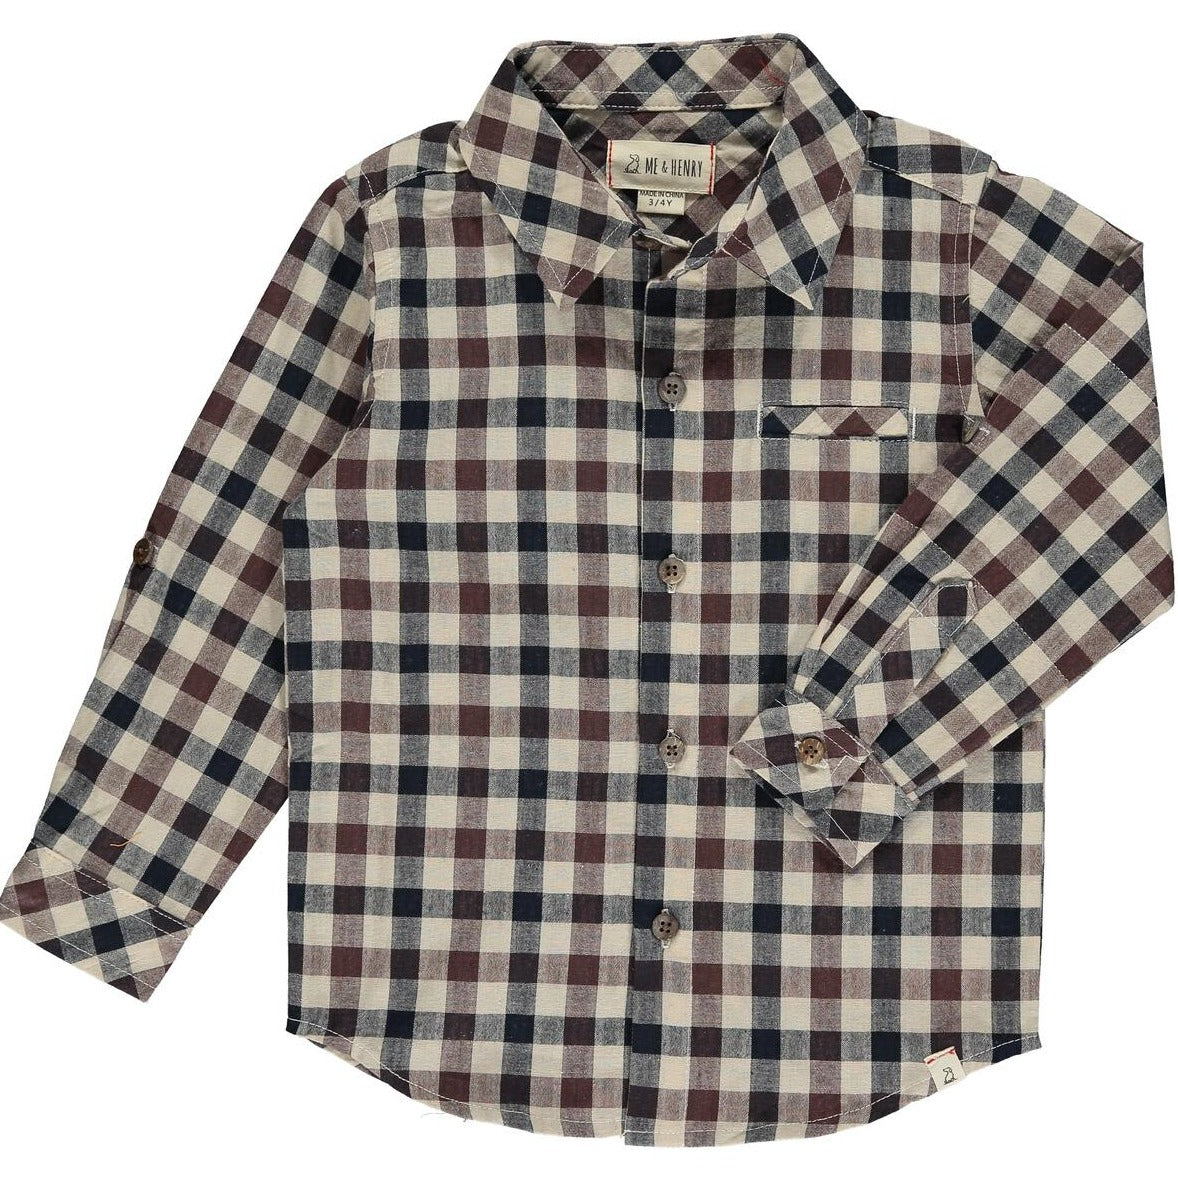 ATWOOD WOVEN SHIRT